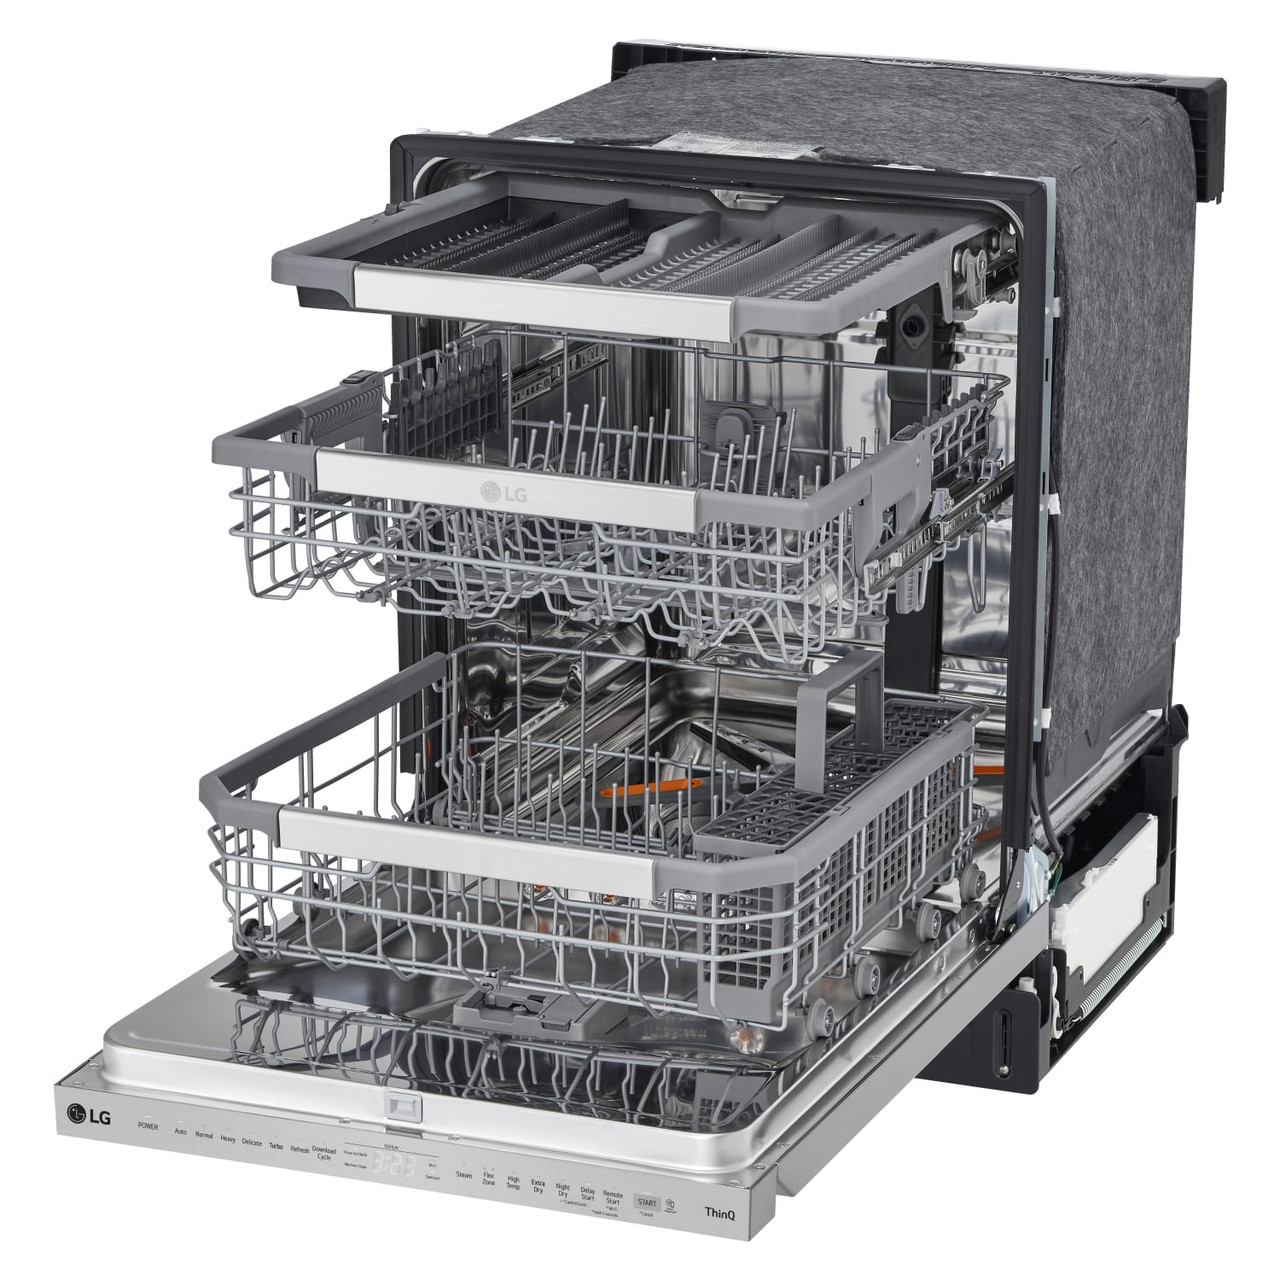 LDPS6762D by LG - Smart Top Control Dishwasher with QuadWash® Pro,  TrueSteam® and Dynamic Dry®